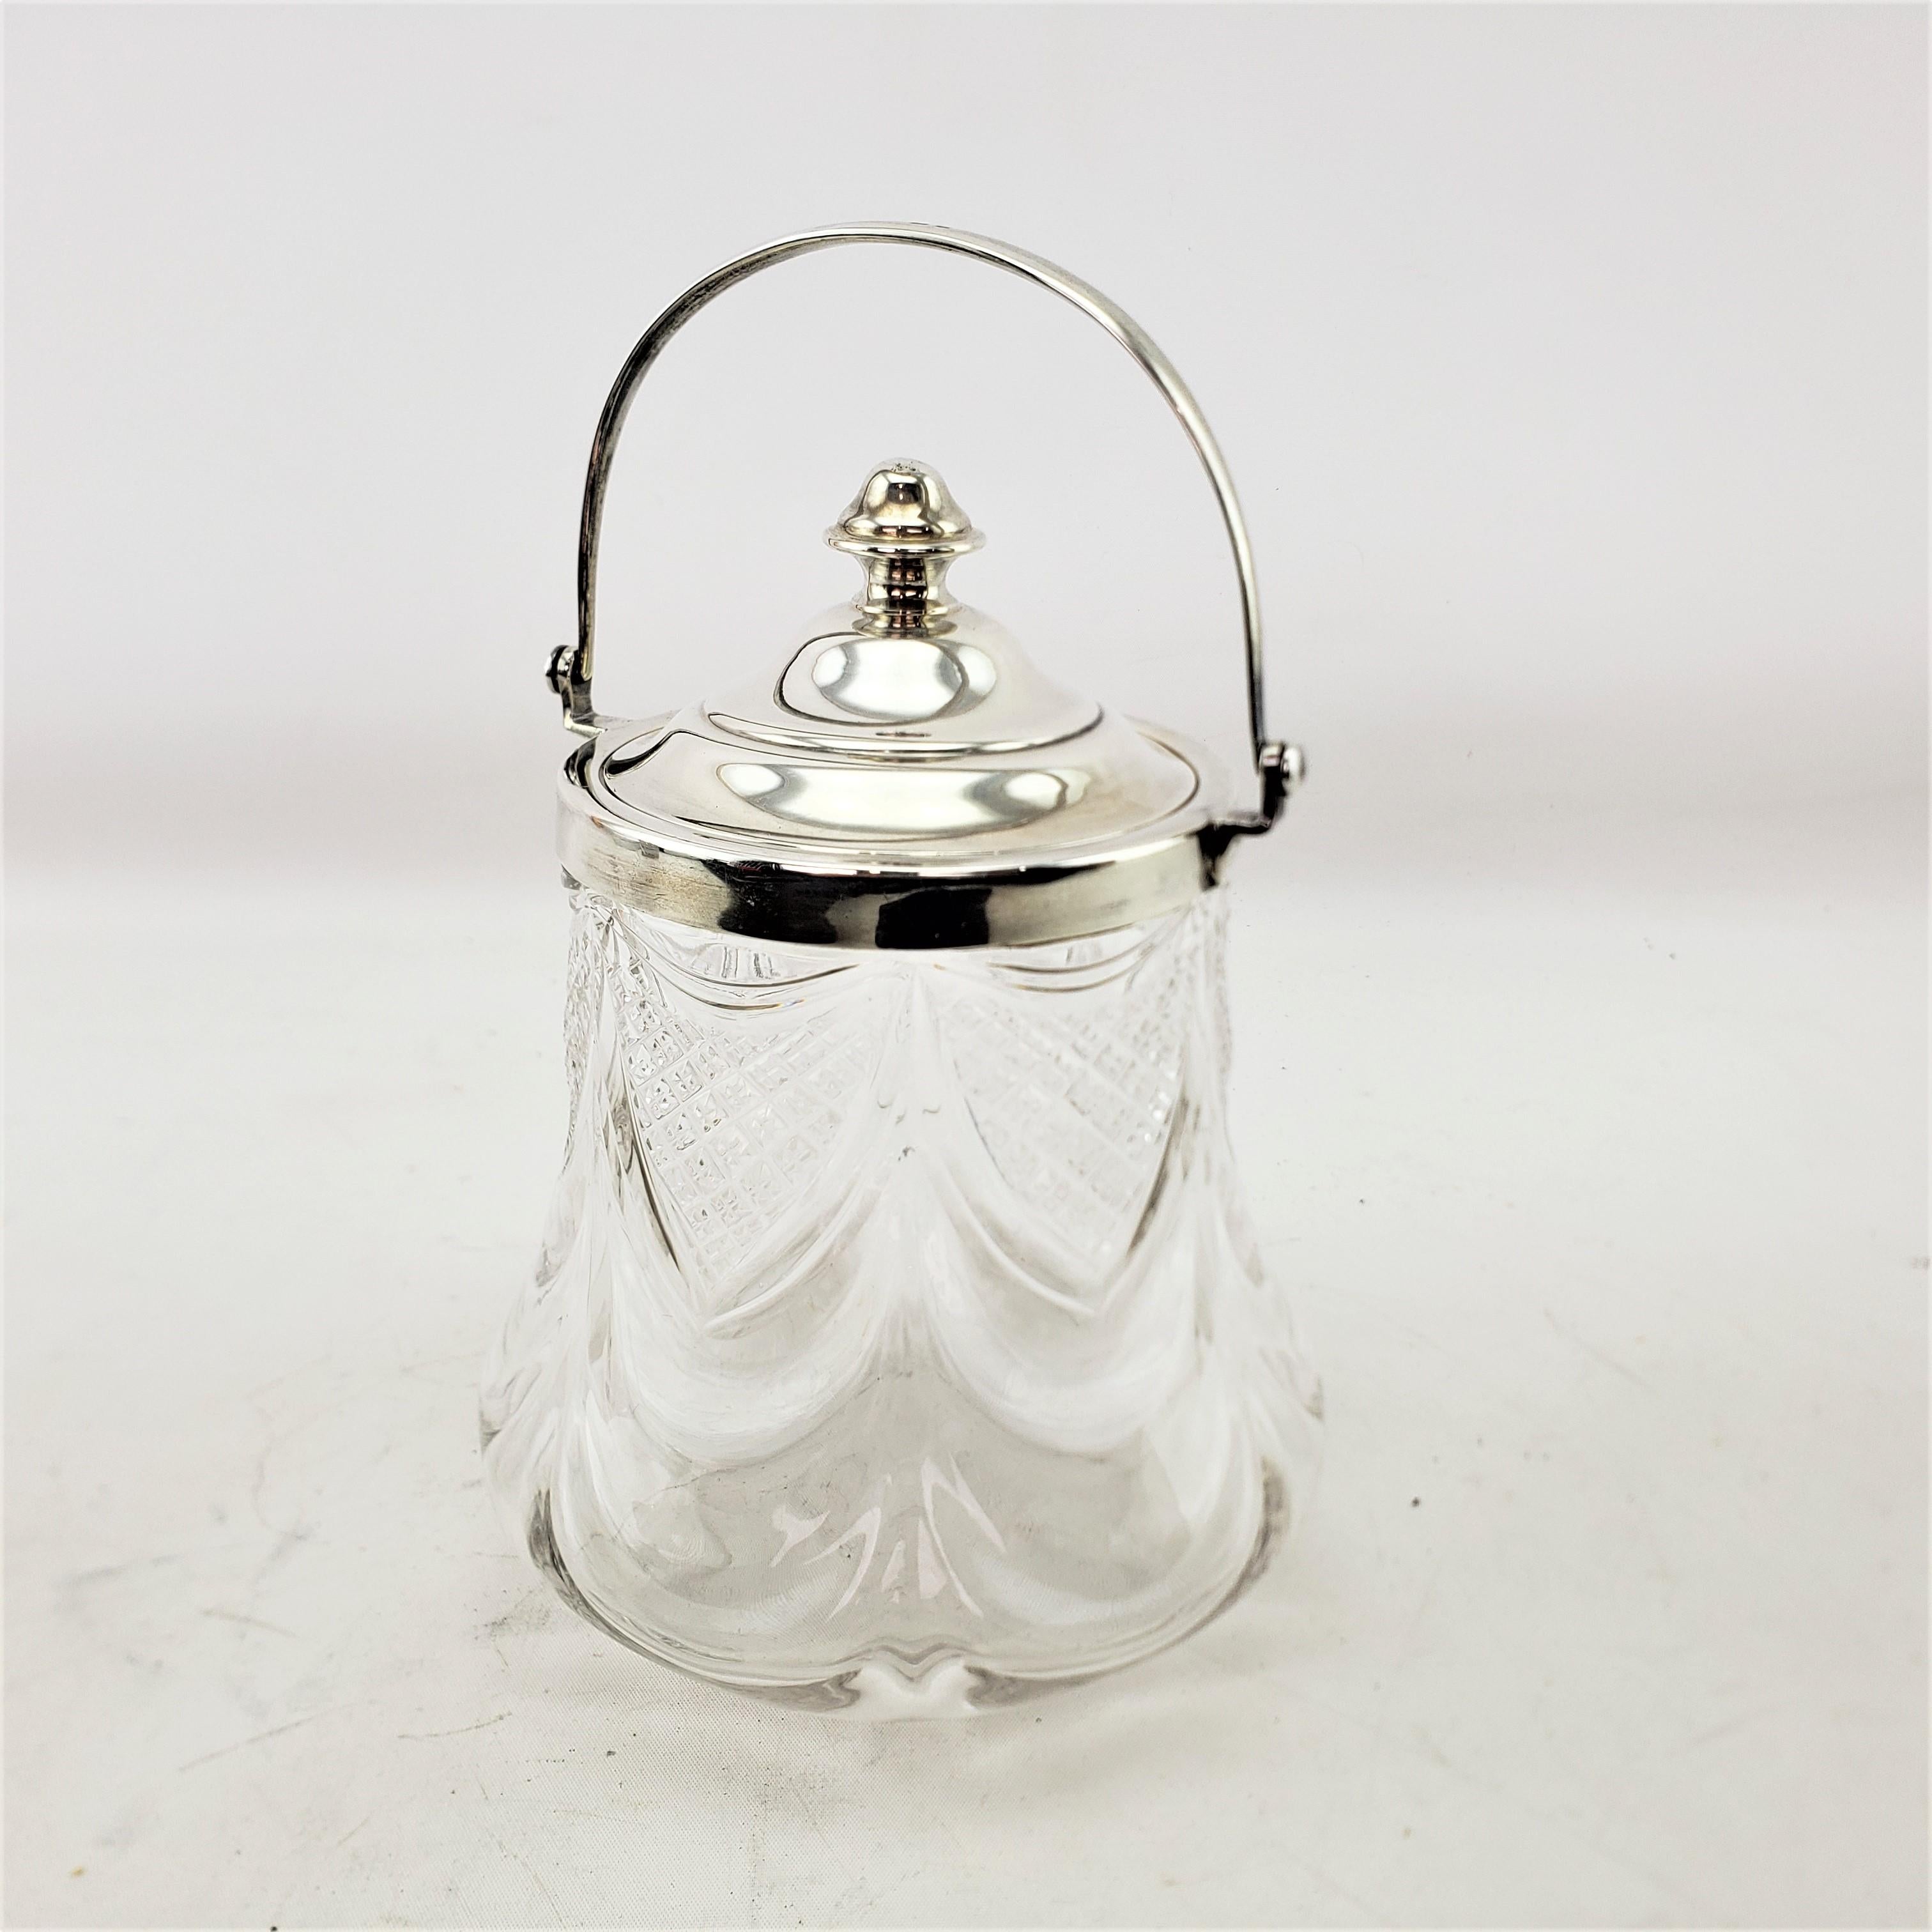 This antique biscuit barrel or covered jar was made by the well known English silversmith James Deakin & Sons in approximately 1920 and done in a period Art Deco style. This biscuit barrel is composed of clear crystal with draped diamond cut